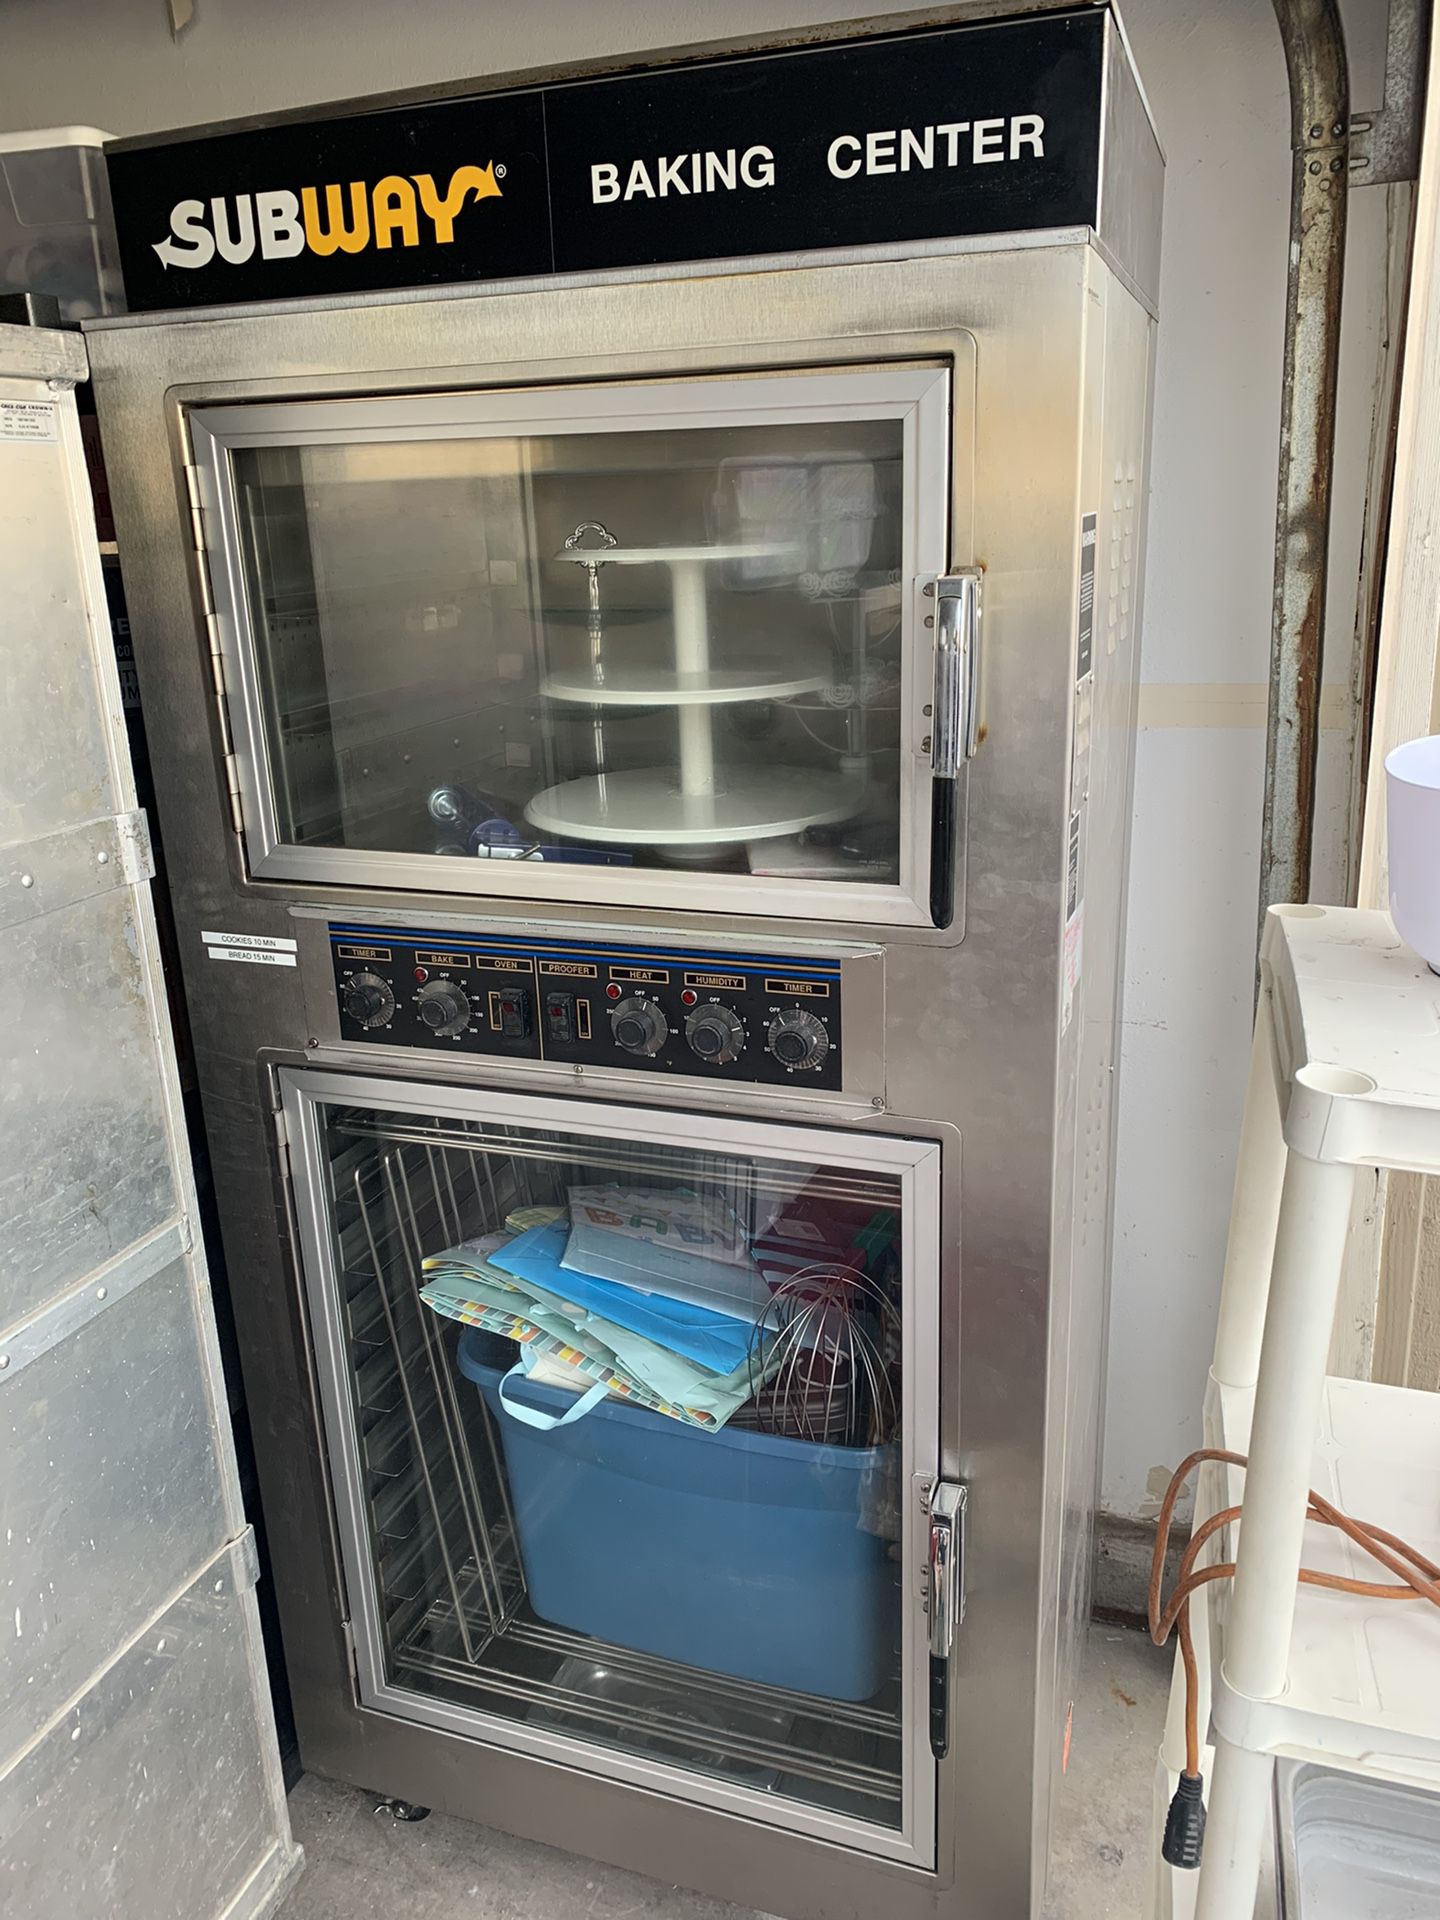 Subway Oven and Proofer